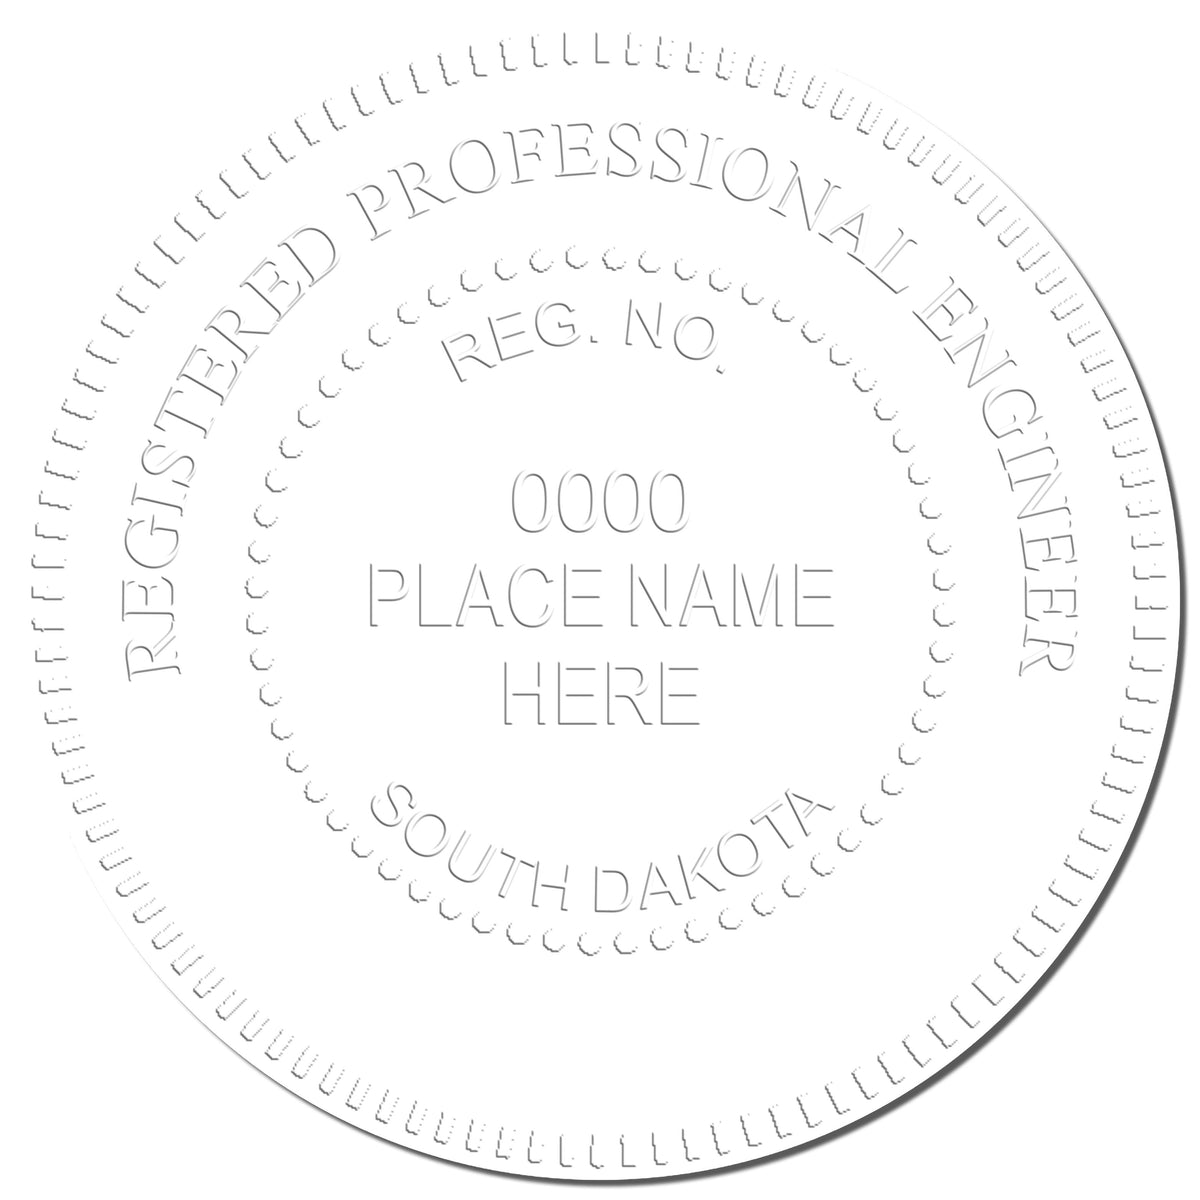 This paper is stamped with a sample imprint of the Hybrid South Dakota Engineer Seal, signifying its quality and reliability.